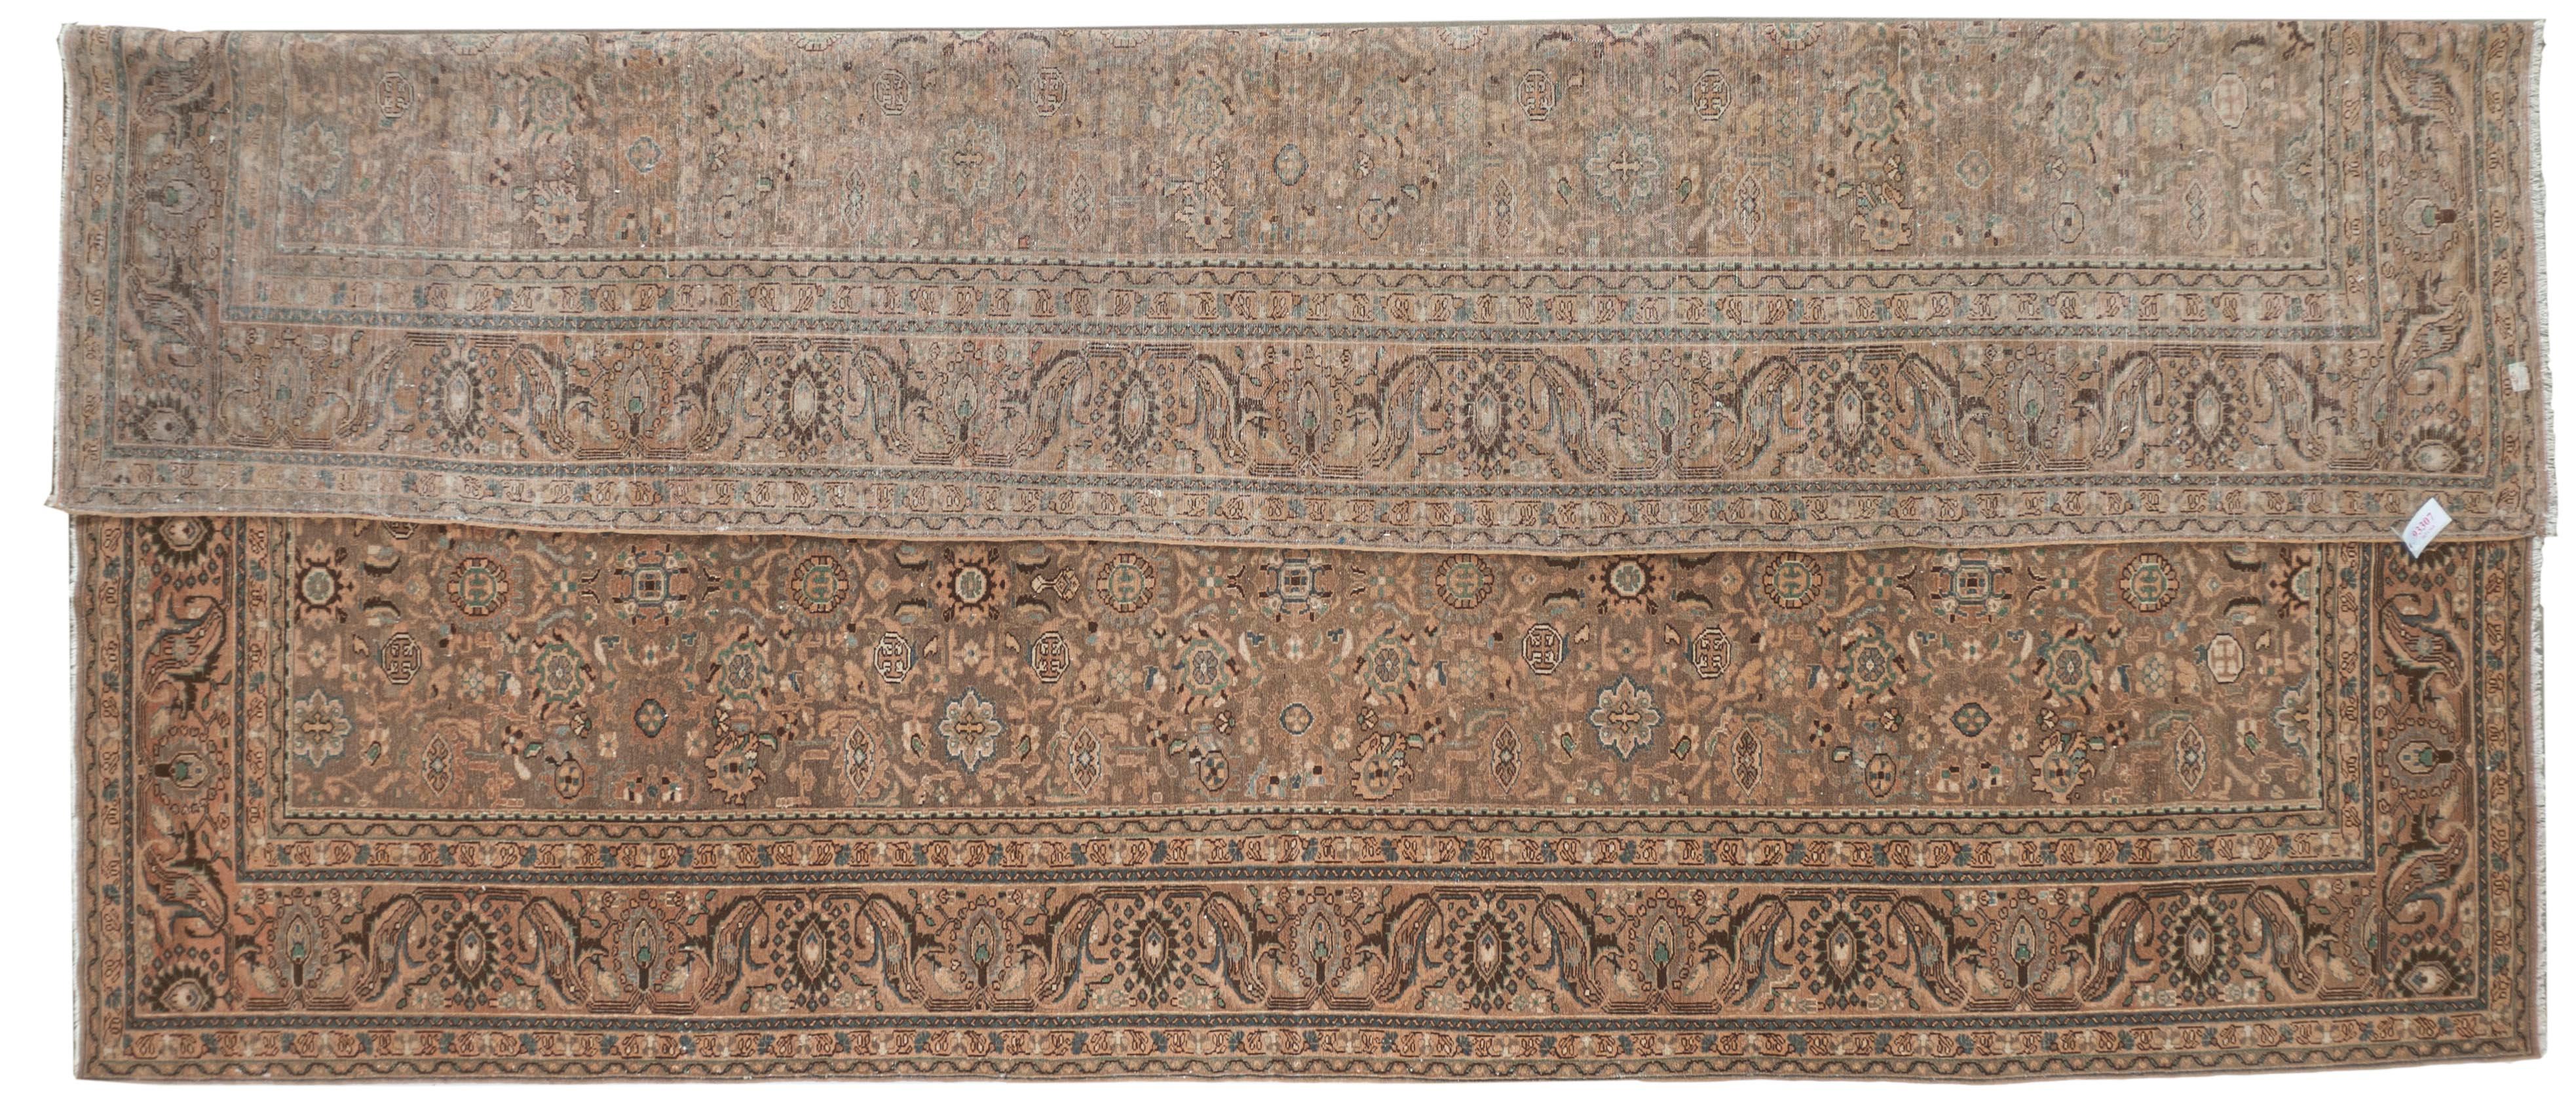 This Antique Distressed Mahal is an all wool Handmade and Hand knotted rug. This distinctive area rug that has an all over design and wide stylized floral frame is from the 20th century and was made in Iran. The name is derived from the Mahallat